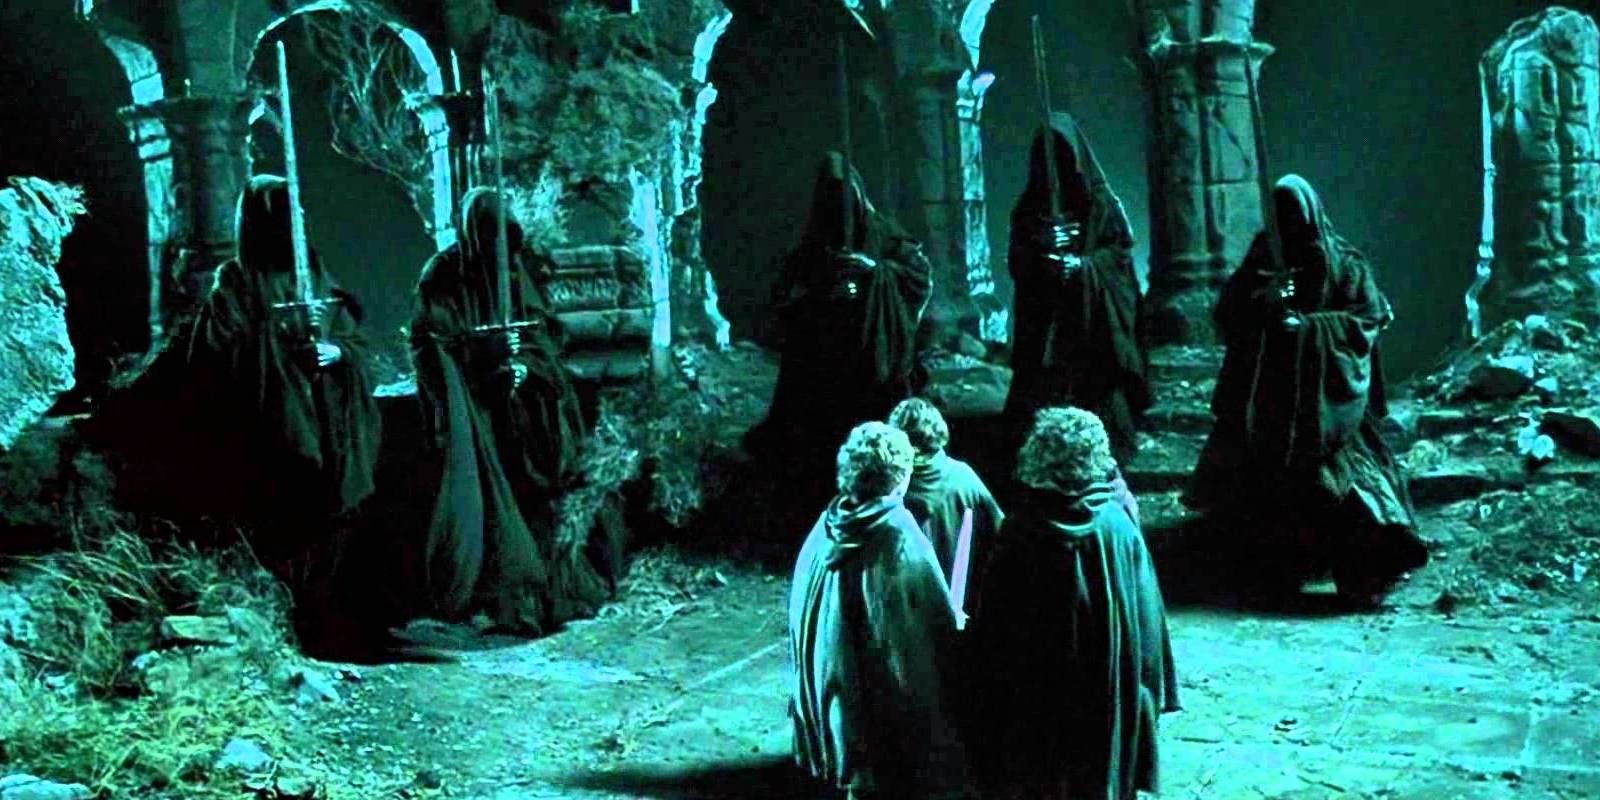 Lord of the Rings - Nazgul vs. the Hobbits